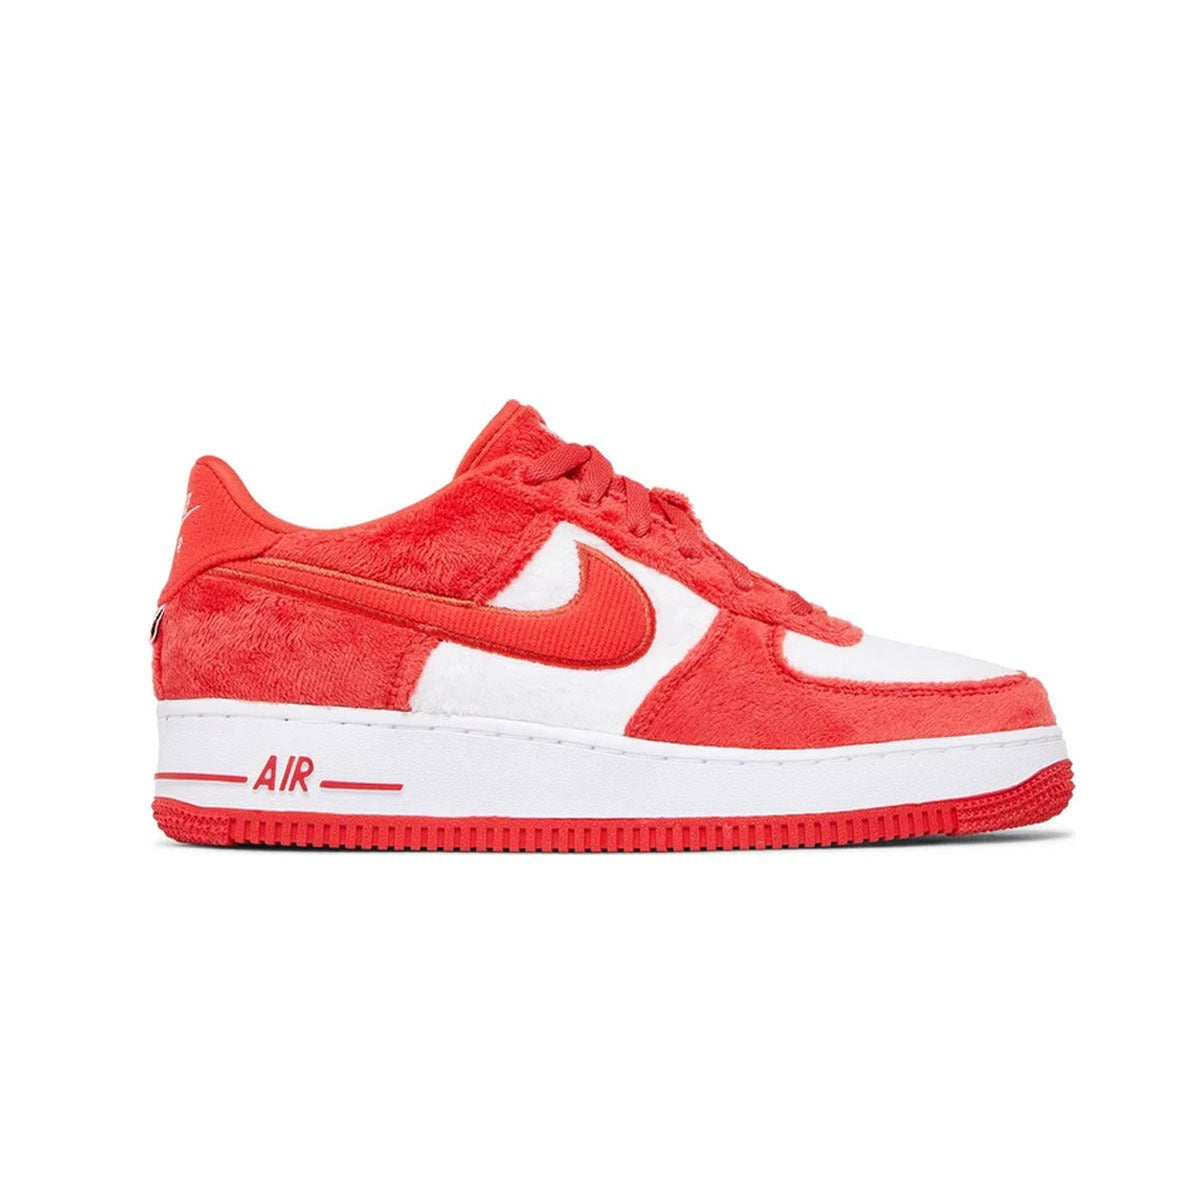 Nike GS Force 1 LVL 8 2 'Valentines Day'